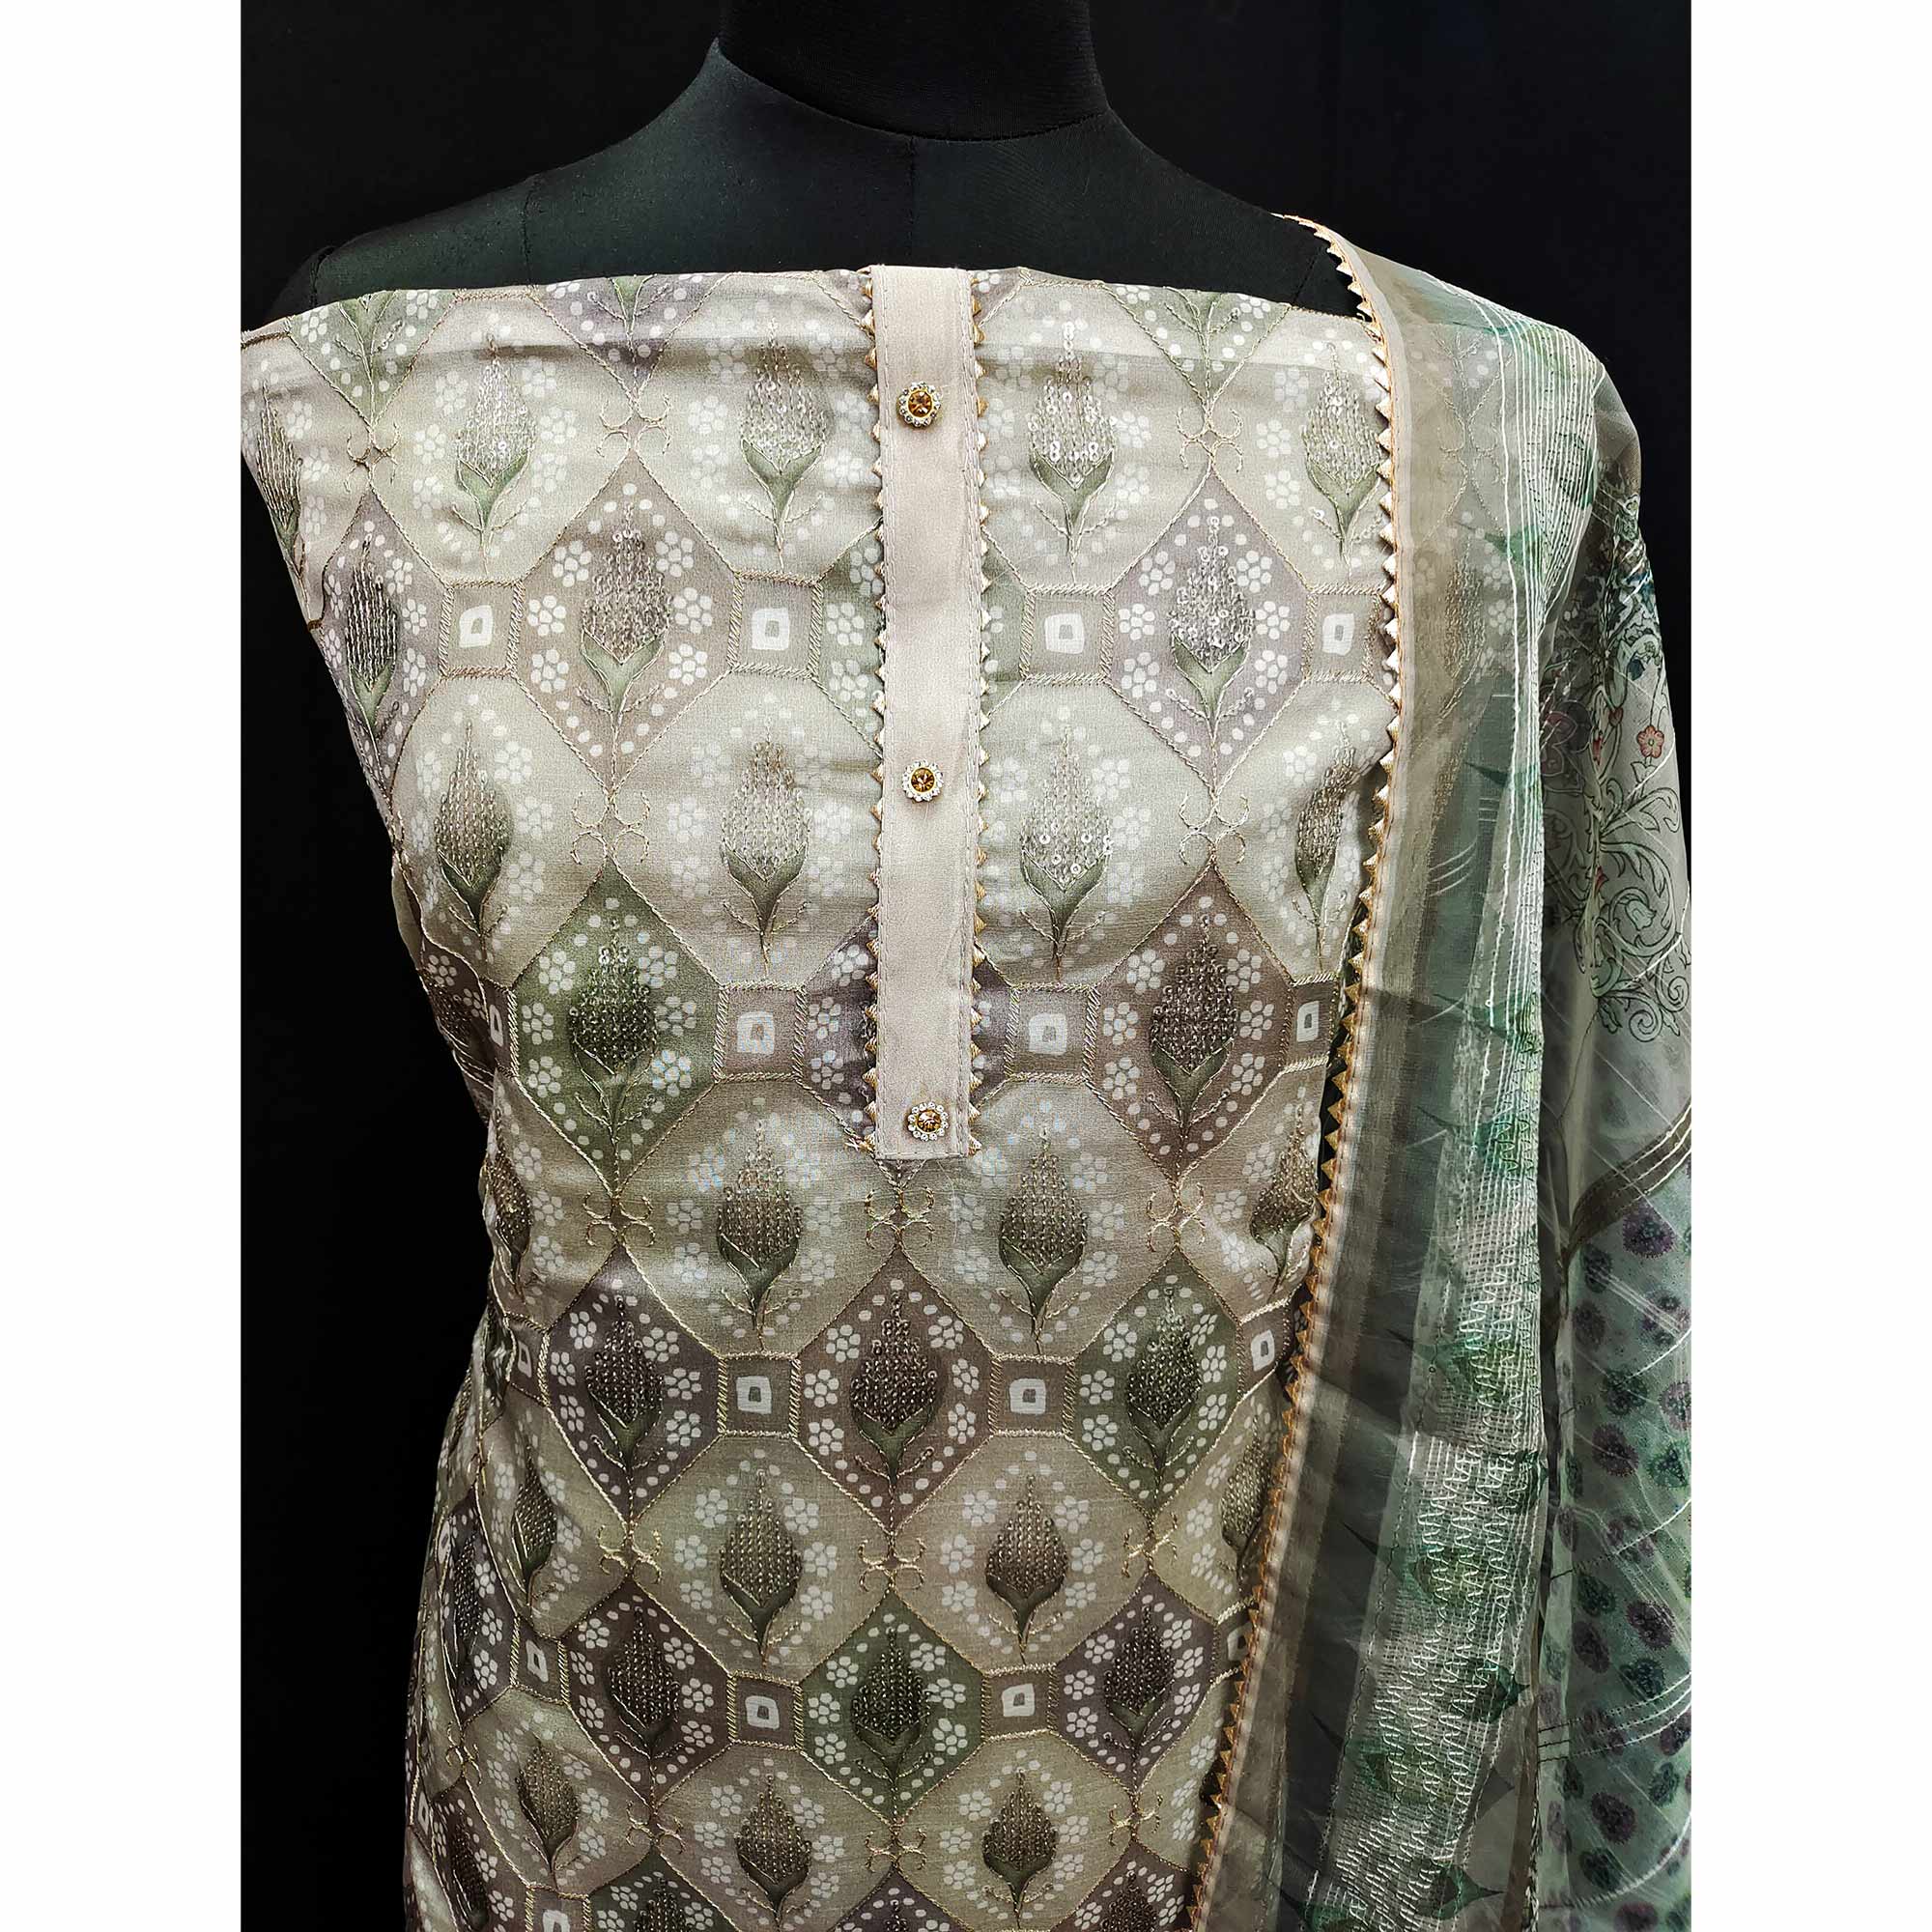 Green Embroidered With Printed Organza Dress Material